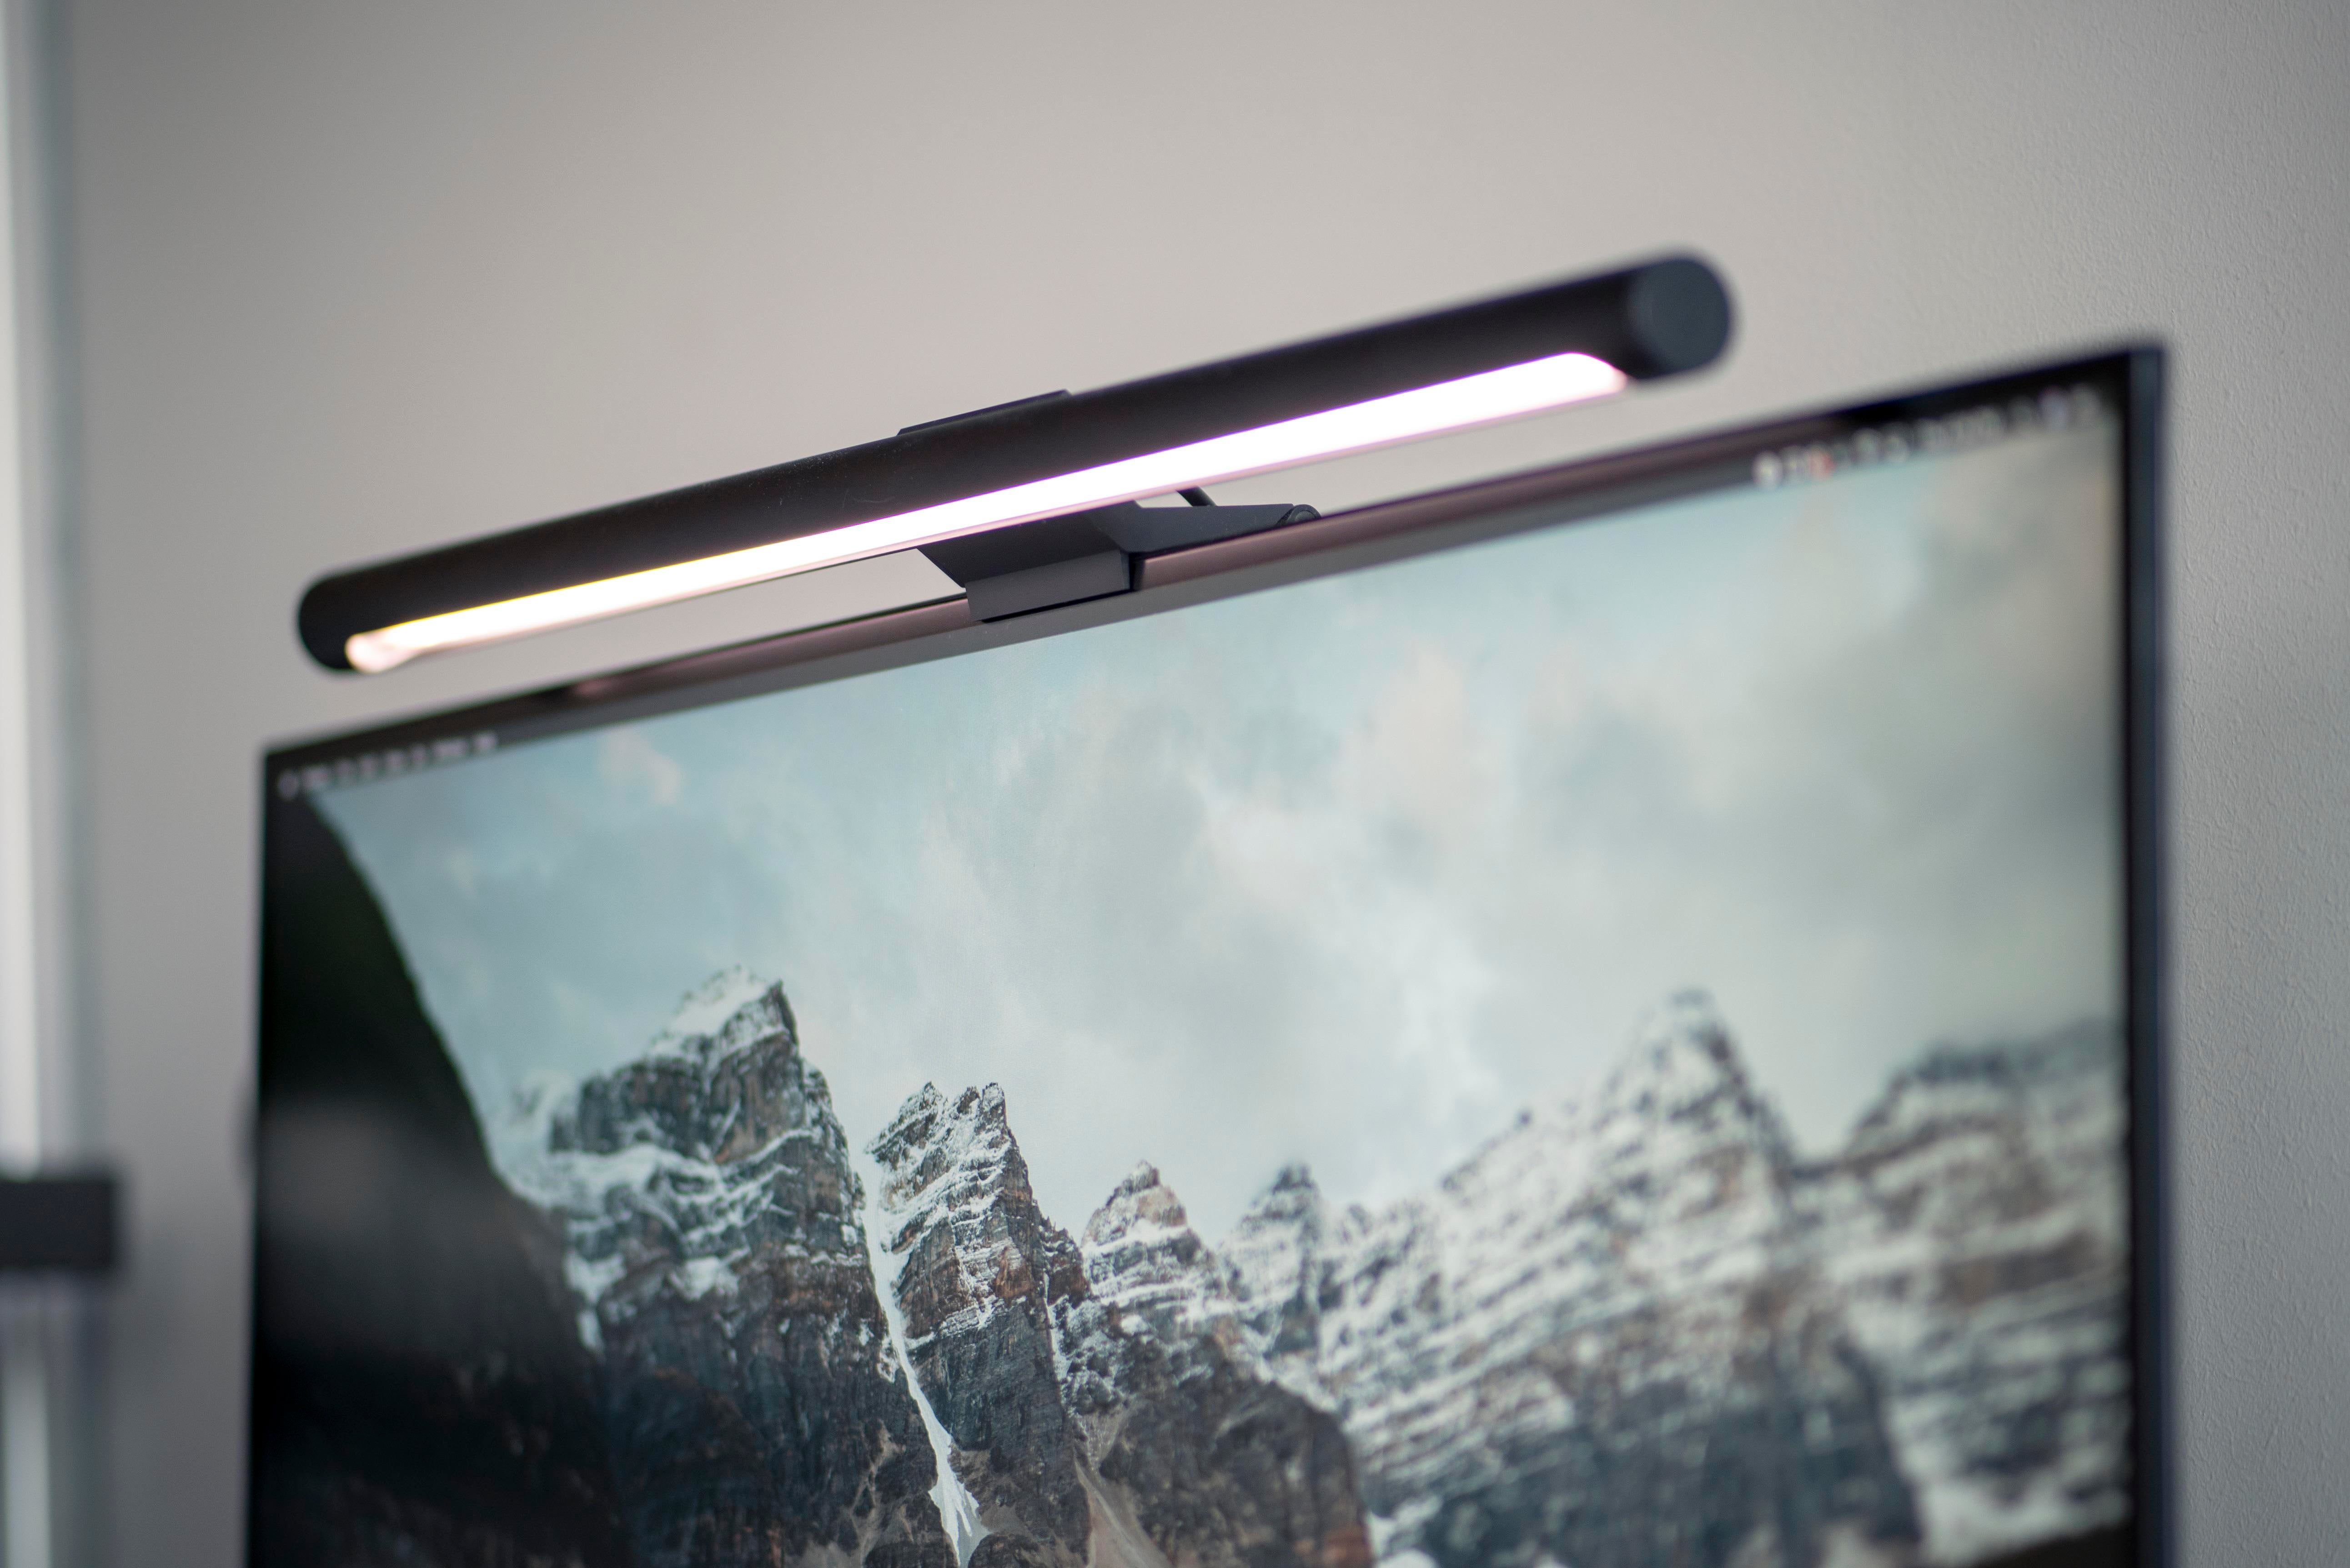 The Xiaomi light bar perched atop the monitor lights up the desk and eases eye strain.